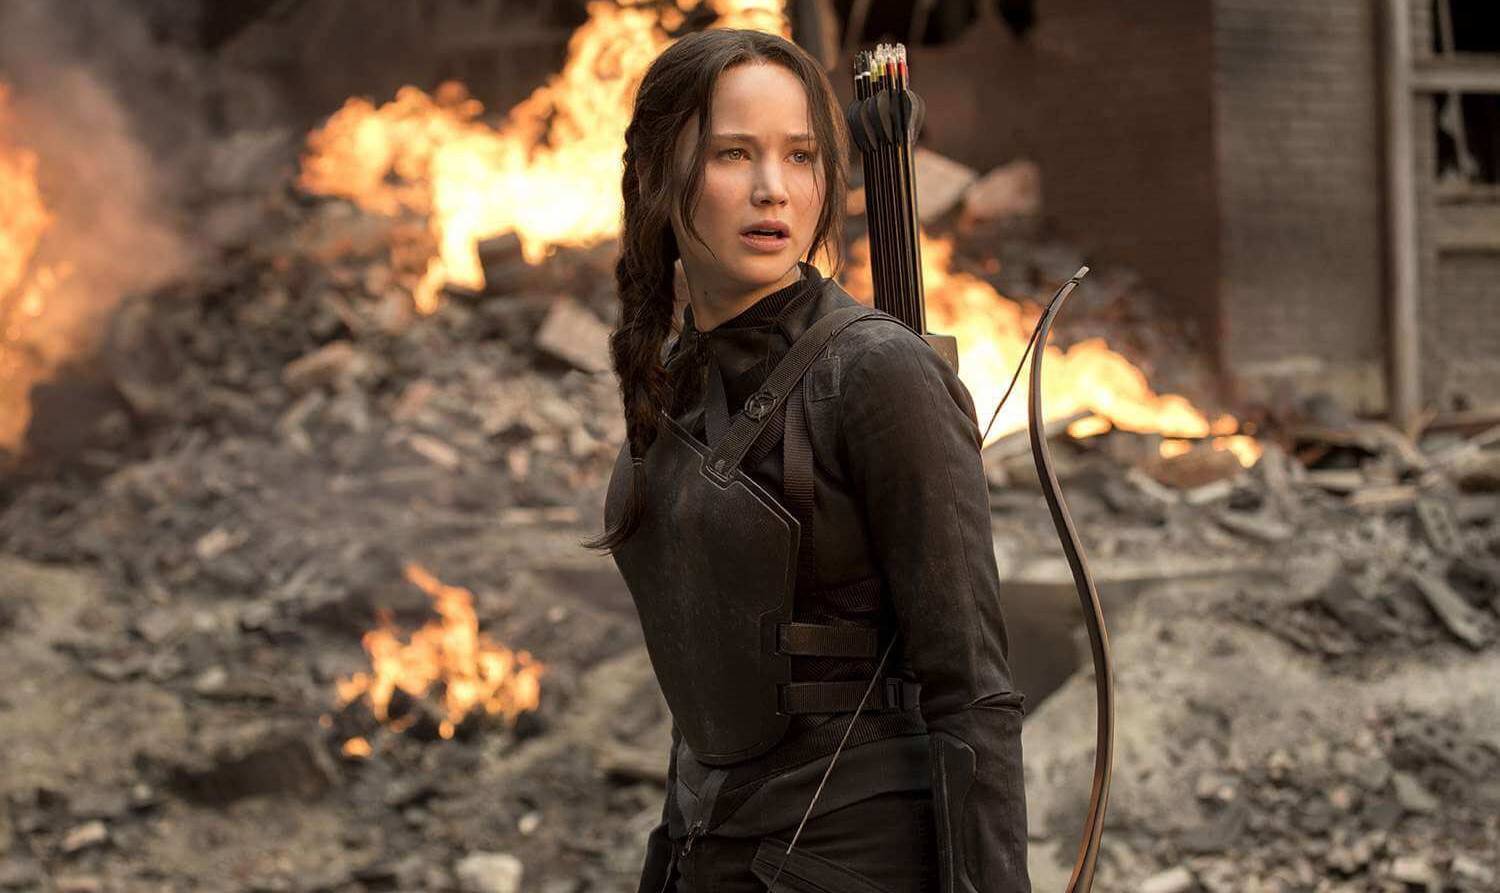 Jennifer Lawrence in The Hunger Games (Lionsgate)